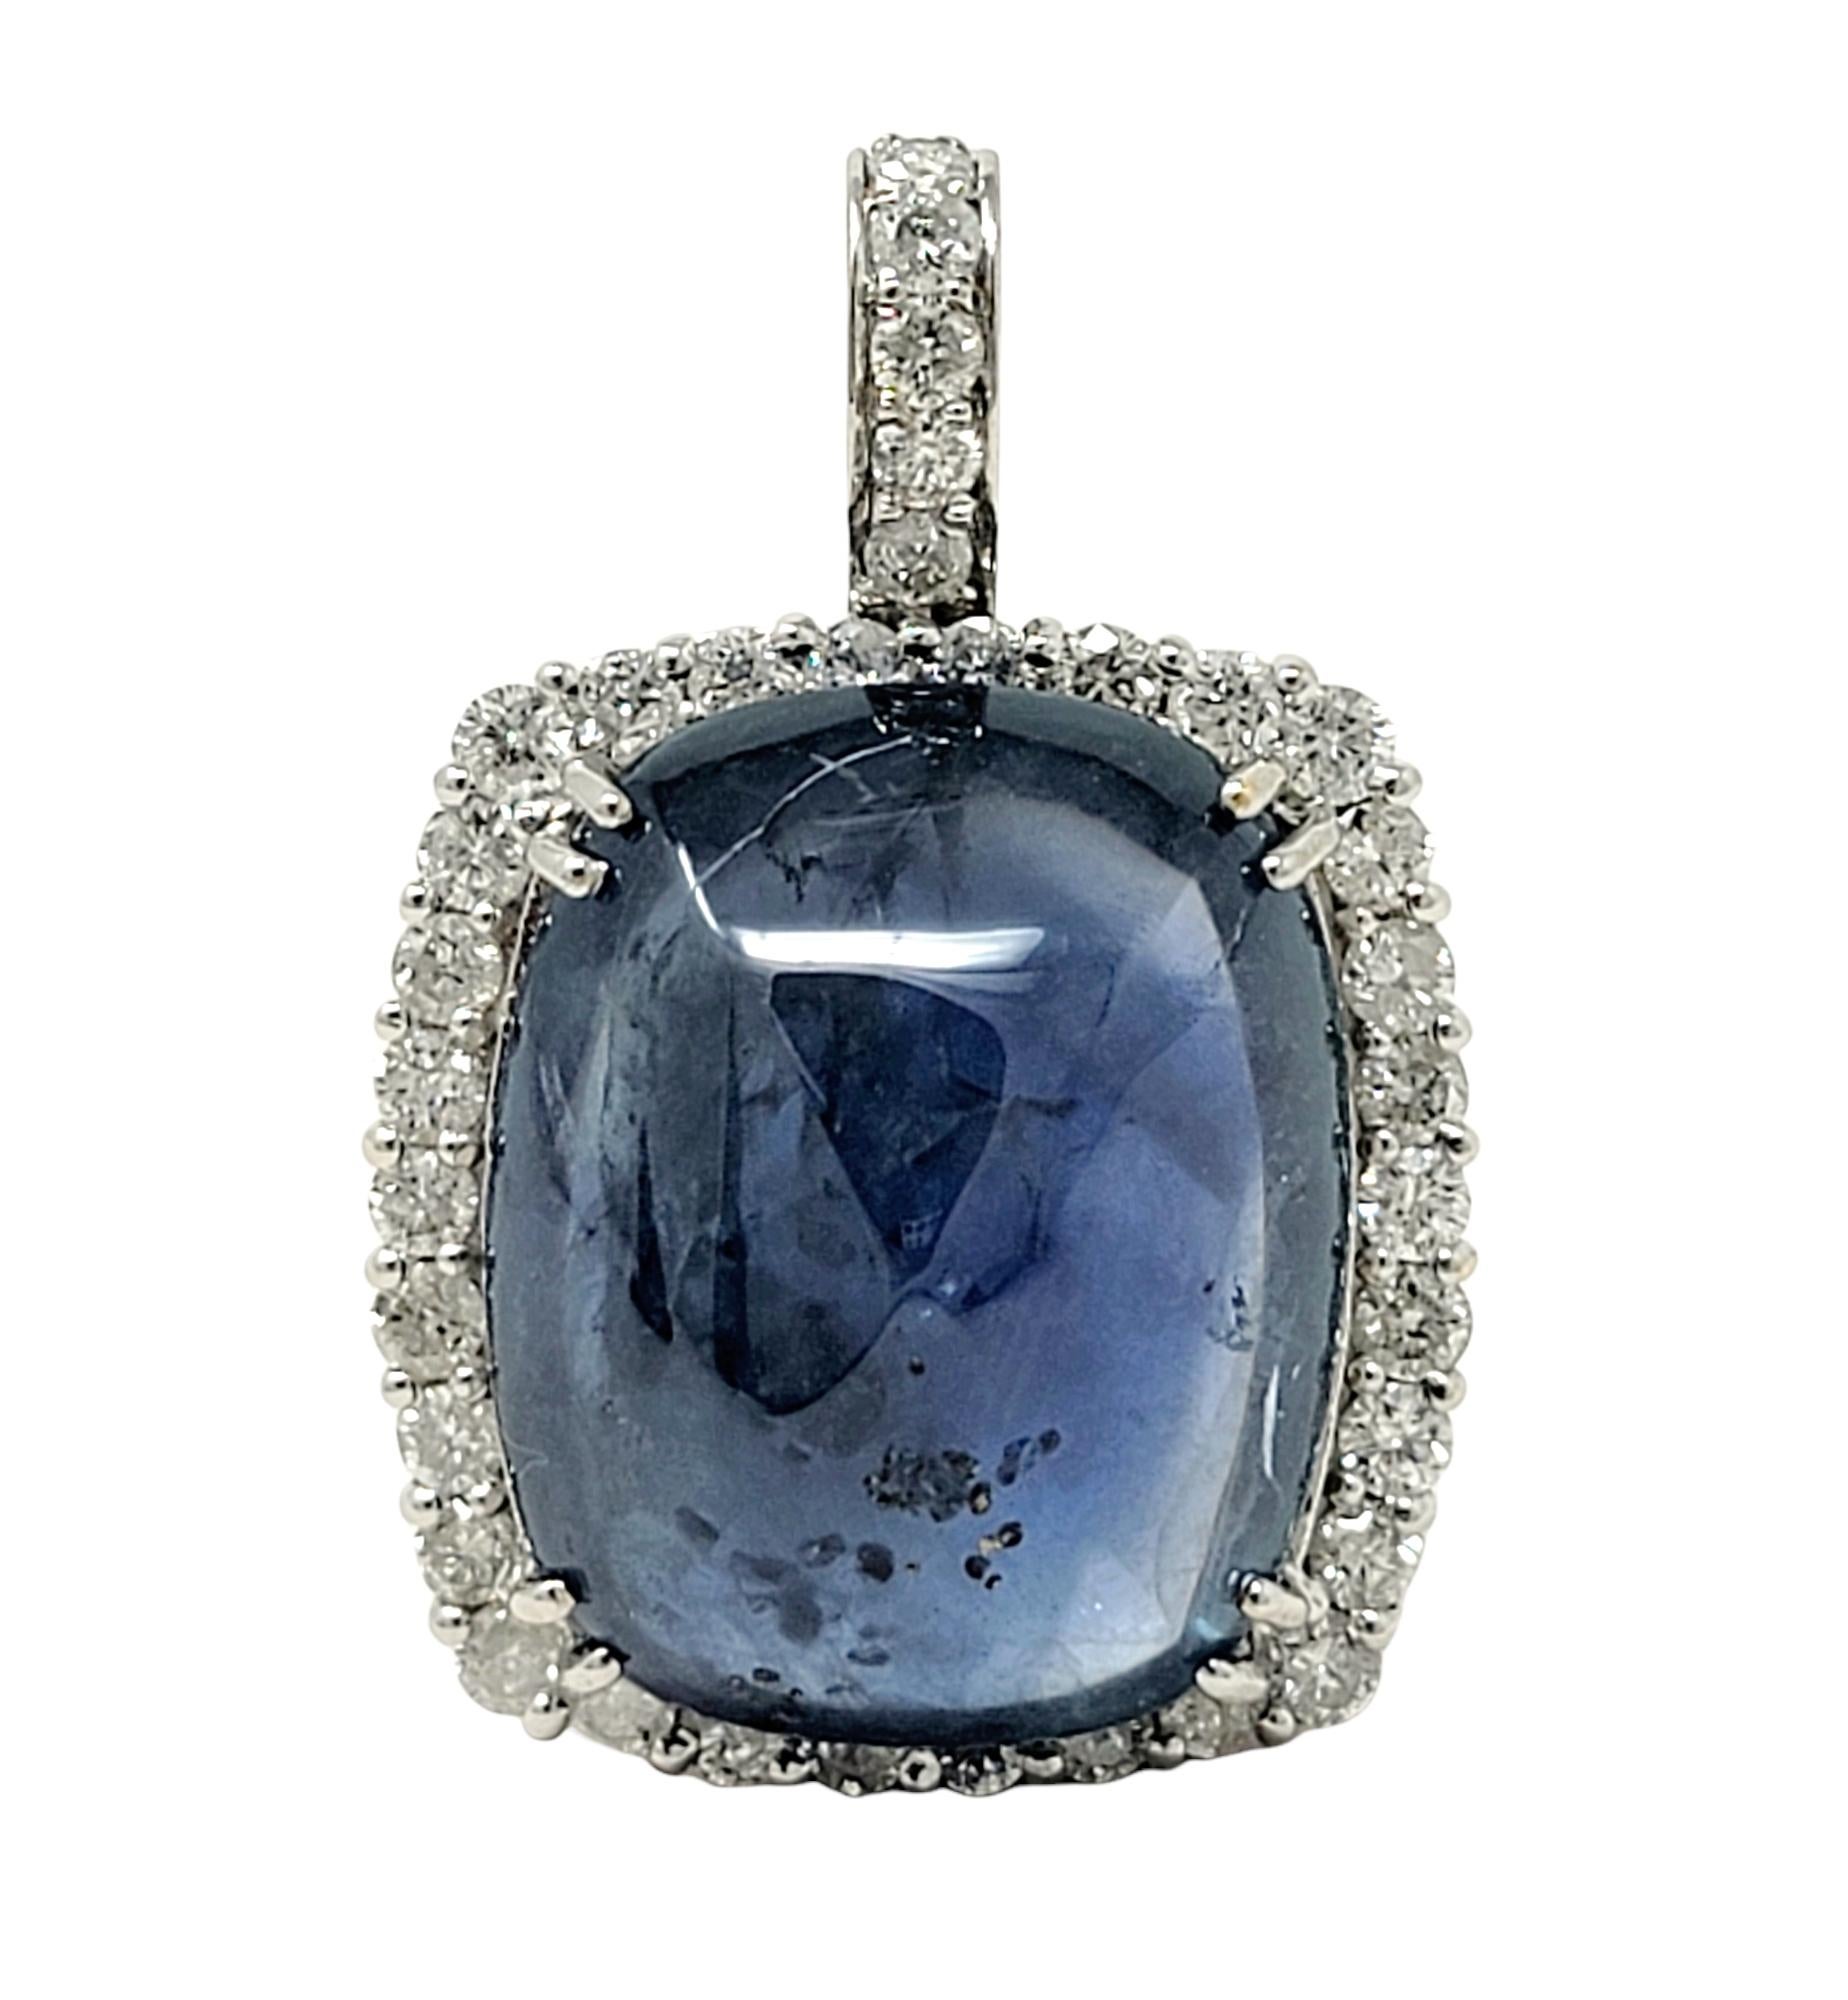 This stunning, sizeable sapphire and diamond pendant will take your breath away! This exquisite natural sapphire from Burma (Myanmar) is an impressive 48.83 carats, cushion shaped, cabochon cut, with an incredible transparent blue color with no